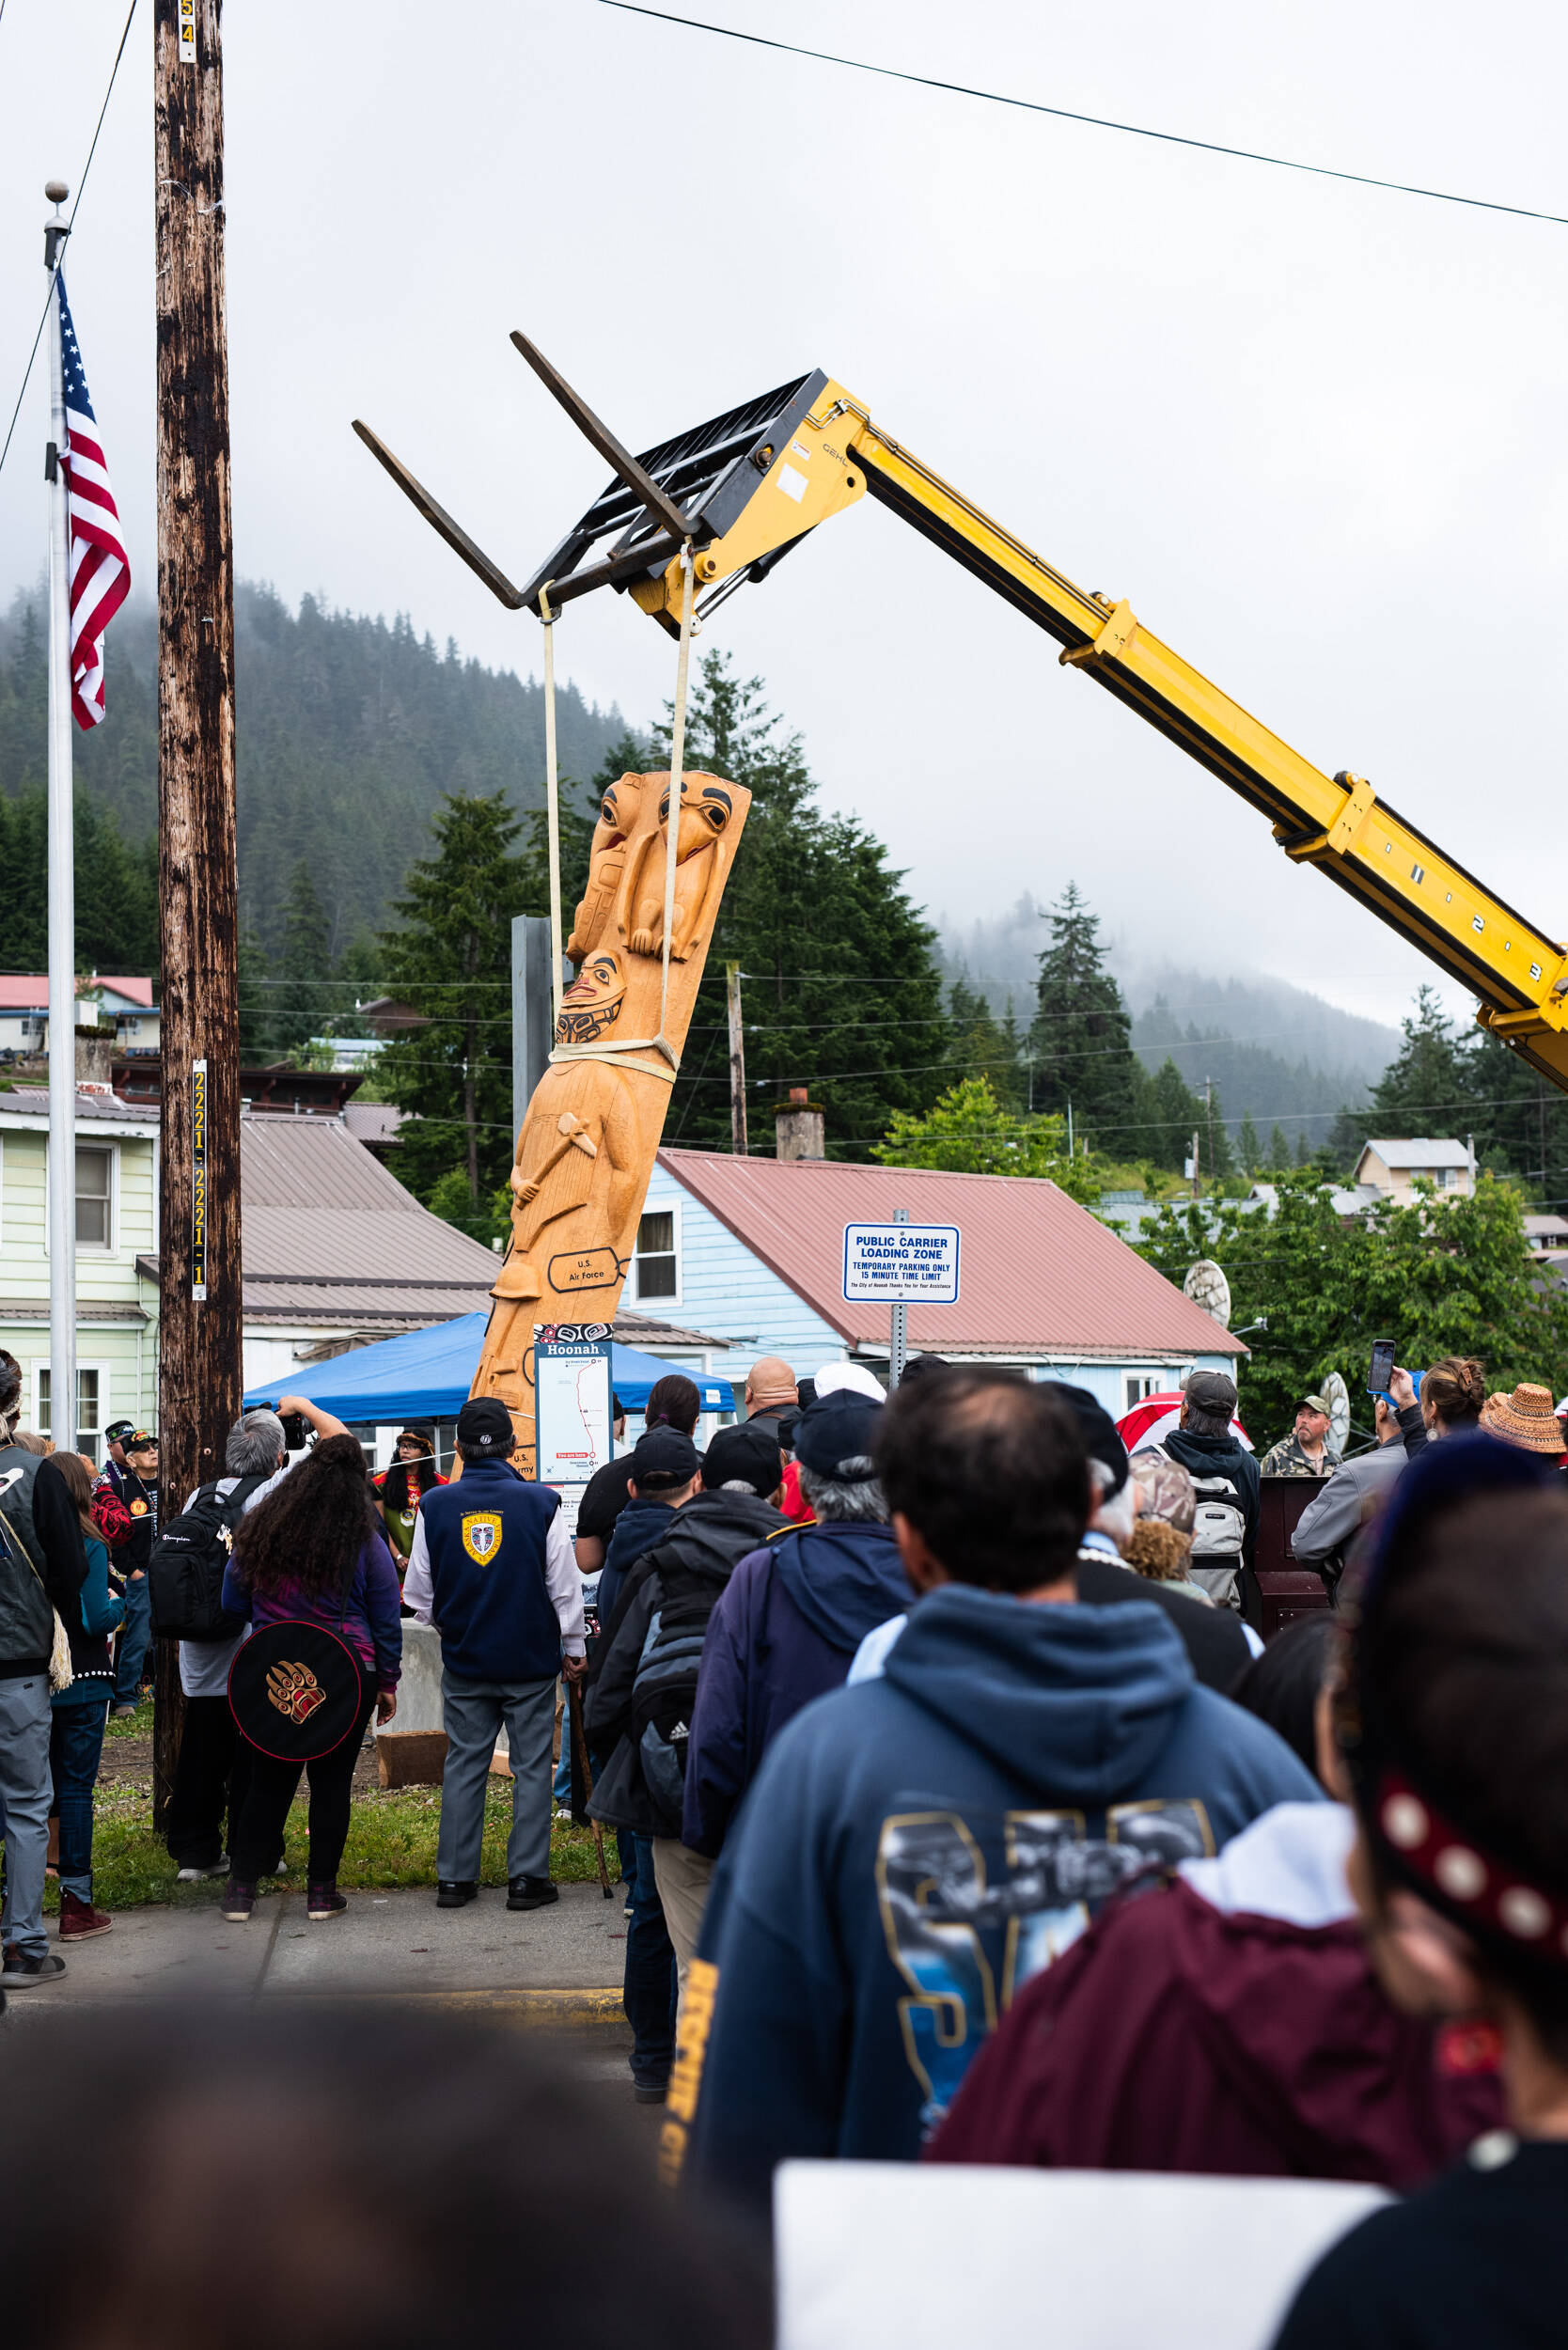 A totem pole carved by Gordon Greenwald is raised in Hoonah in July. The totem pole was a collaborative effort between the local tribal government, the Huna Heritage Foundation, local corporations and Stanley “Steamie” Thompson, a Hoonah local whose last wish was for this totem pole to be erected. (Courtesy Photo / Ian Johnson)